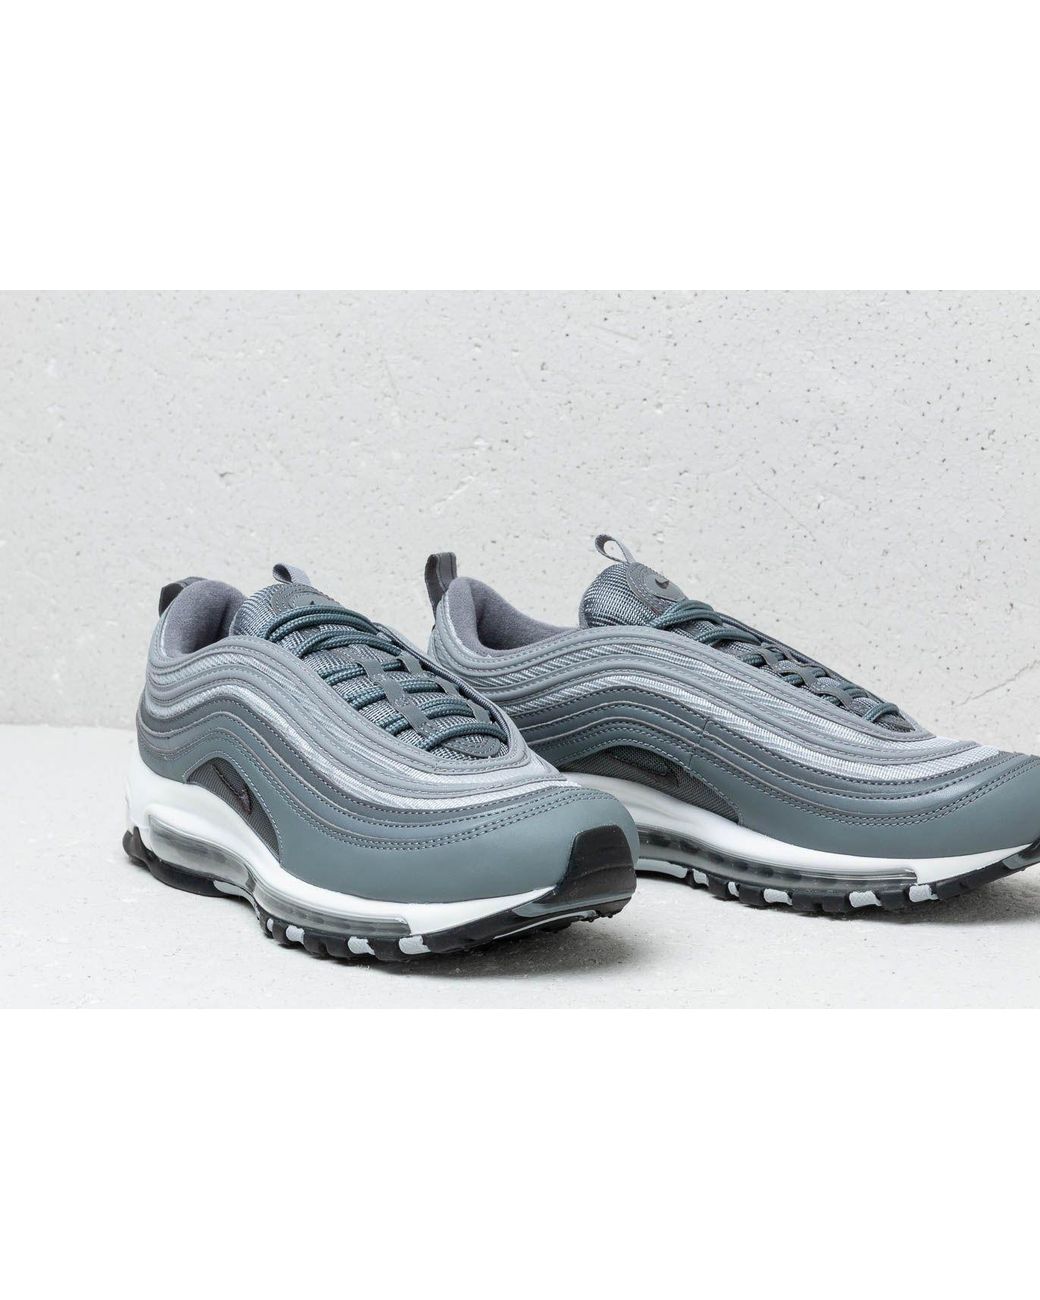 Nike Rubber Air Max 97 Essential Cool Grey/ Wolf Grey-anthracite-white in  Gray for Men - Lyst